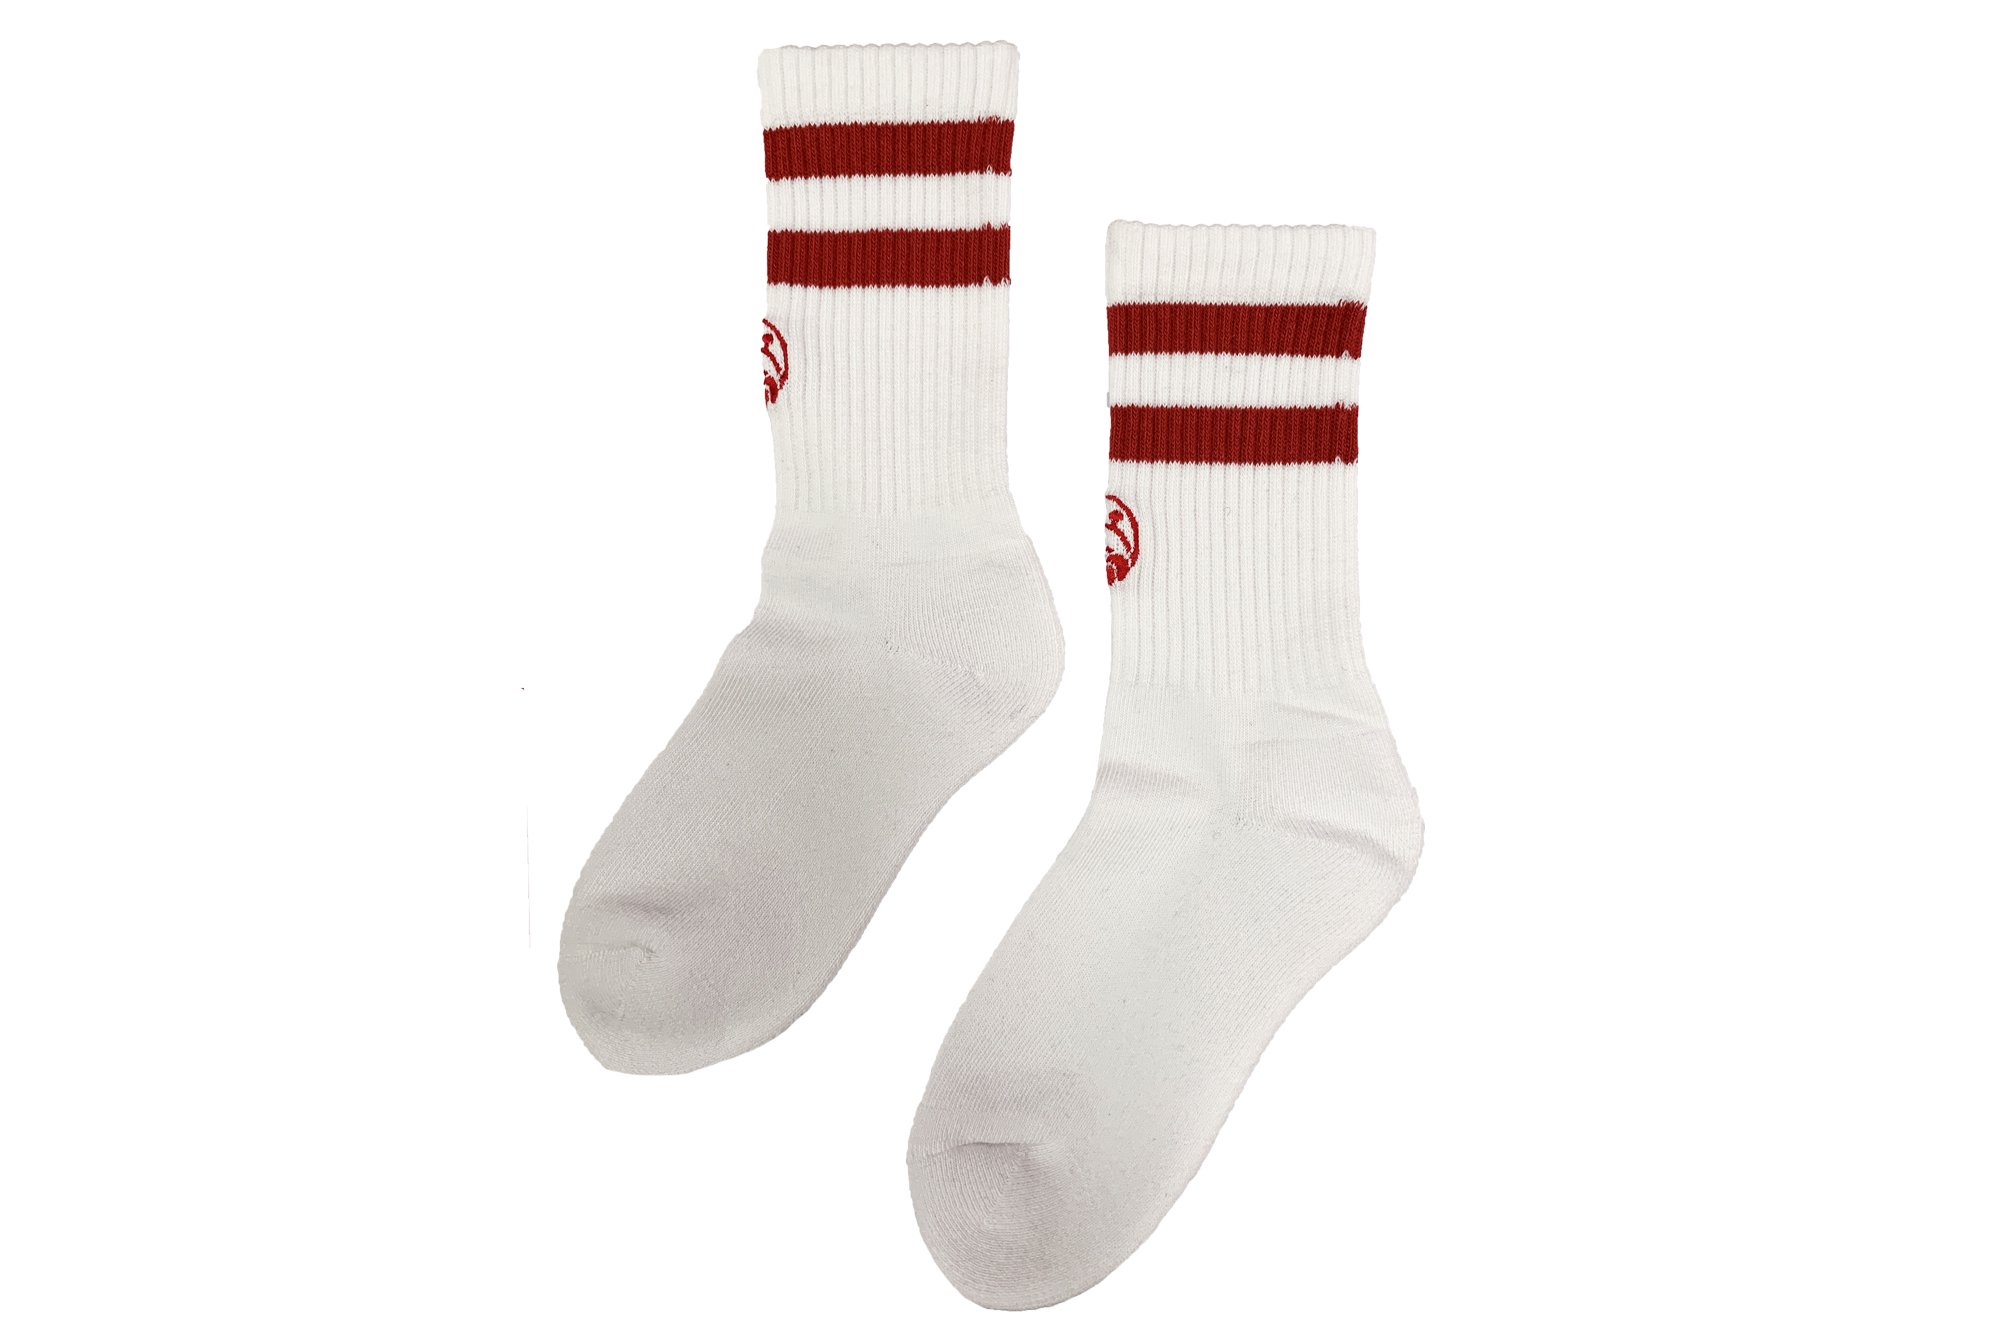 FRORAL EMBLEM SOCKS<br>WHITERED/3/ɻ޴/Ƹ<img class='new_mark_img2' src='https://img.shop-pro.jp/img/new/icons41.gif' style='border:none;display:inline;margin:0px;padding:0px;width:auto;' />